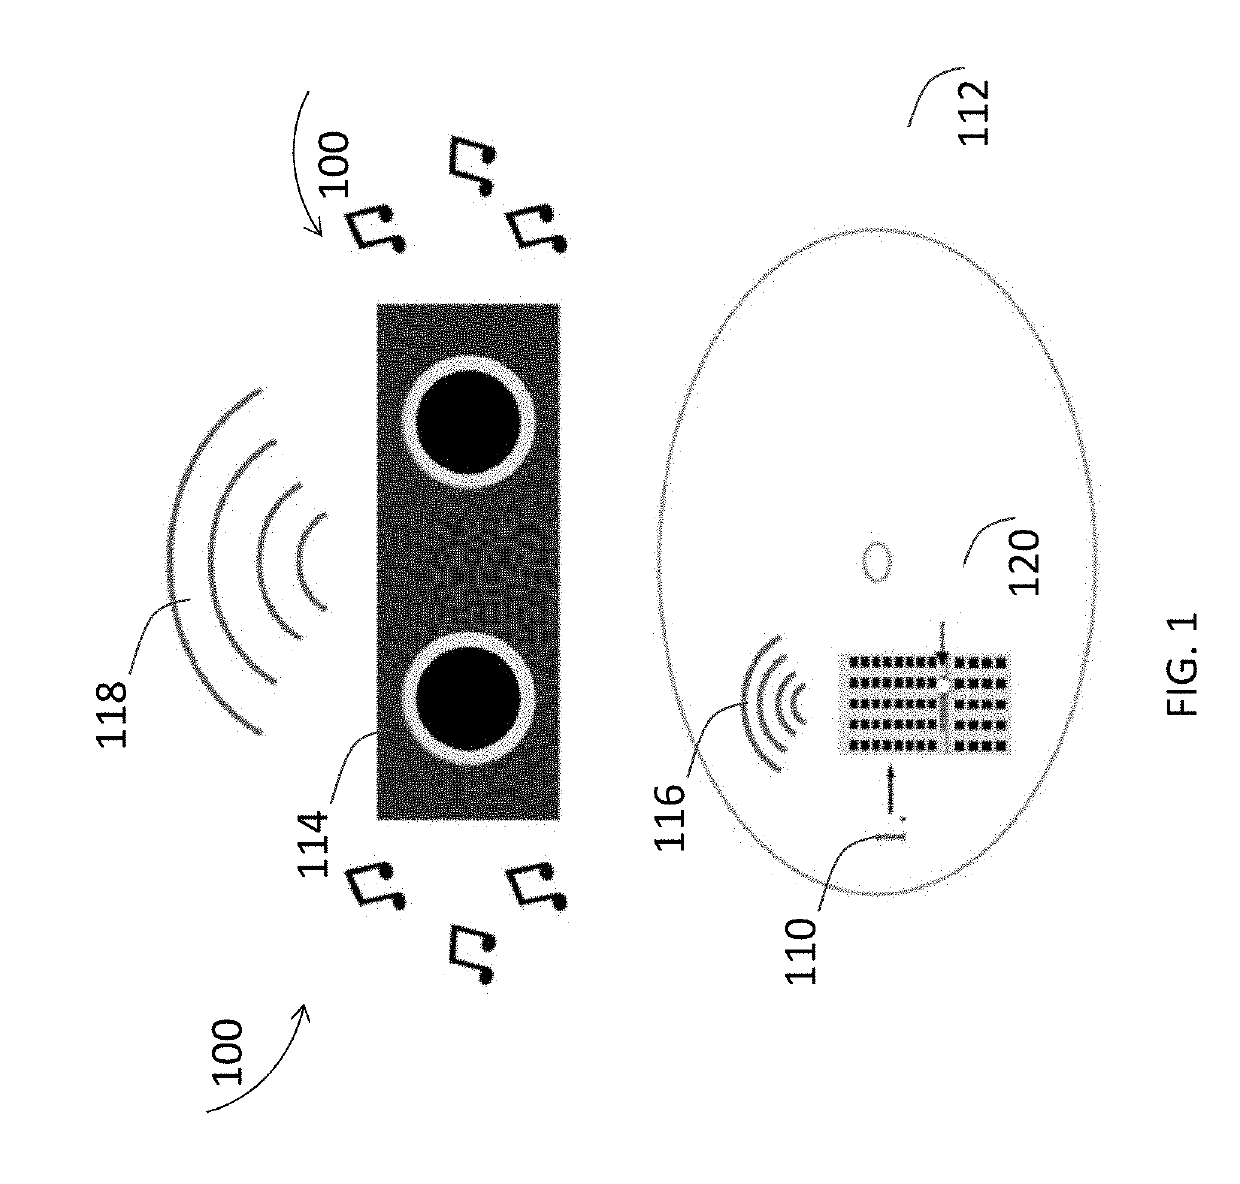 System, device, and method for wireless audio transmission